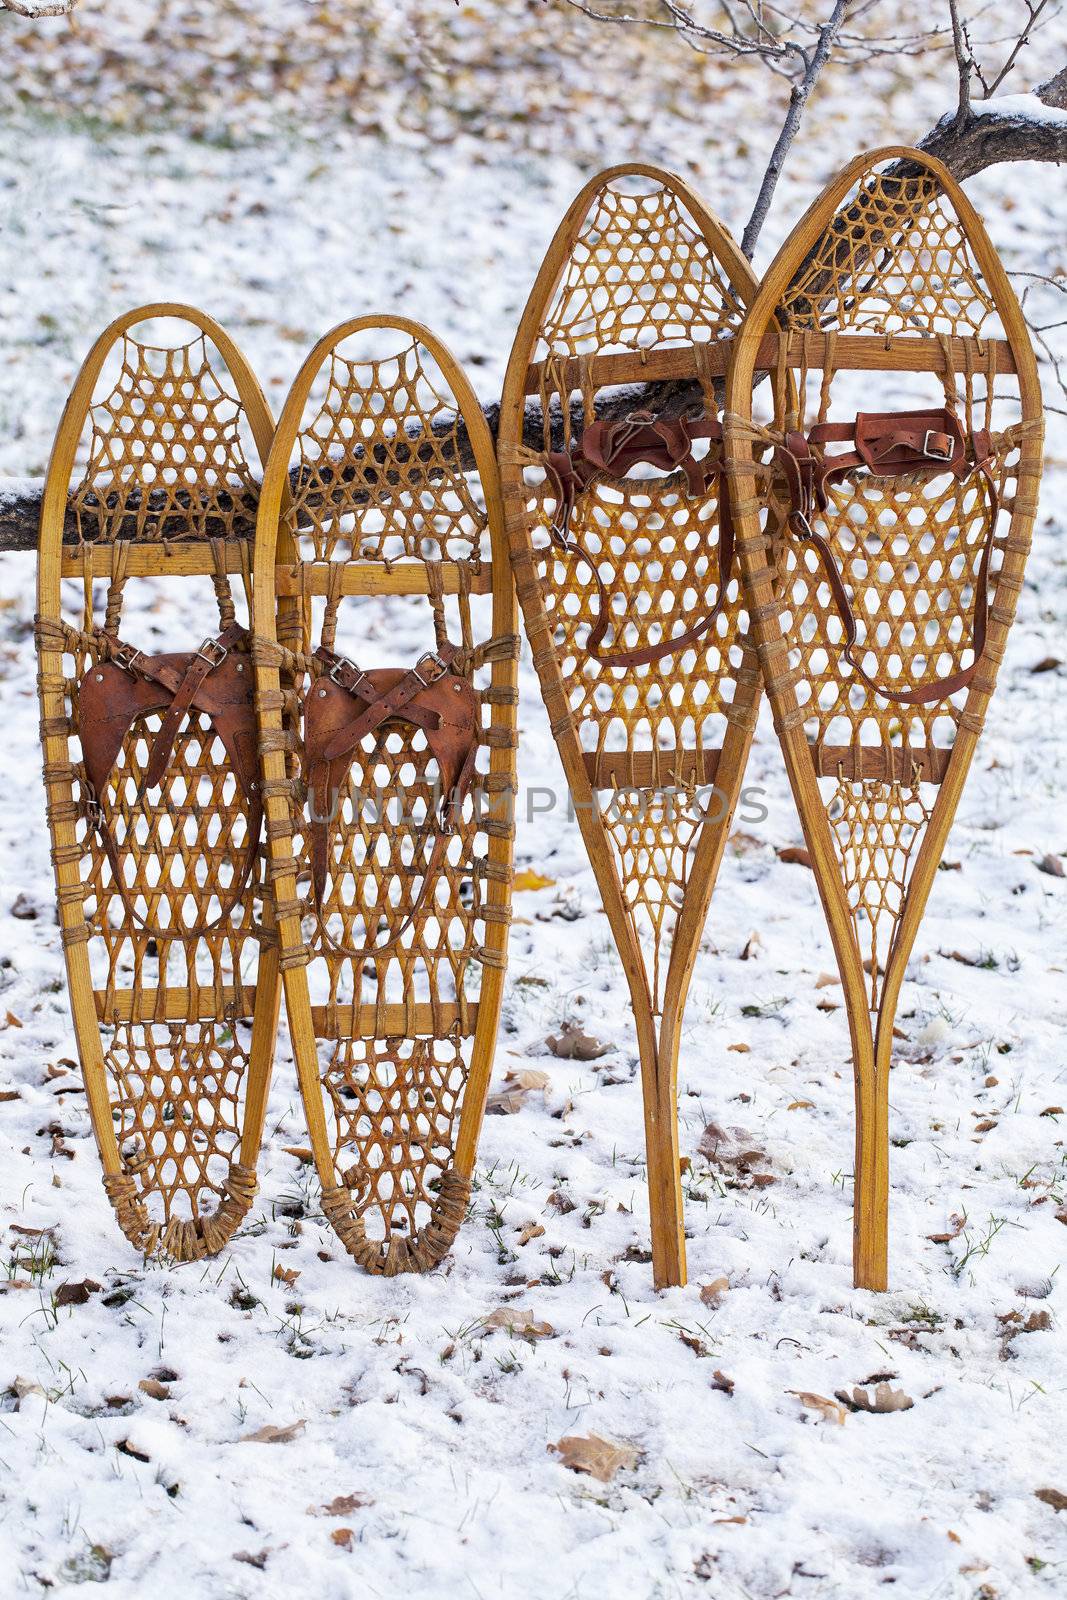 Bear Paw and Huron snowshoes by PixelsAway